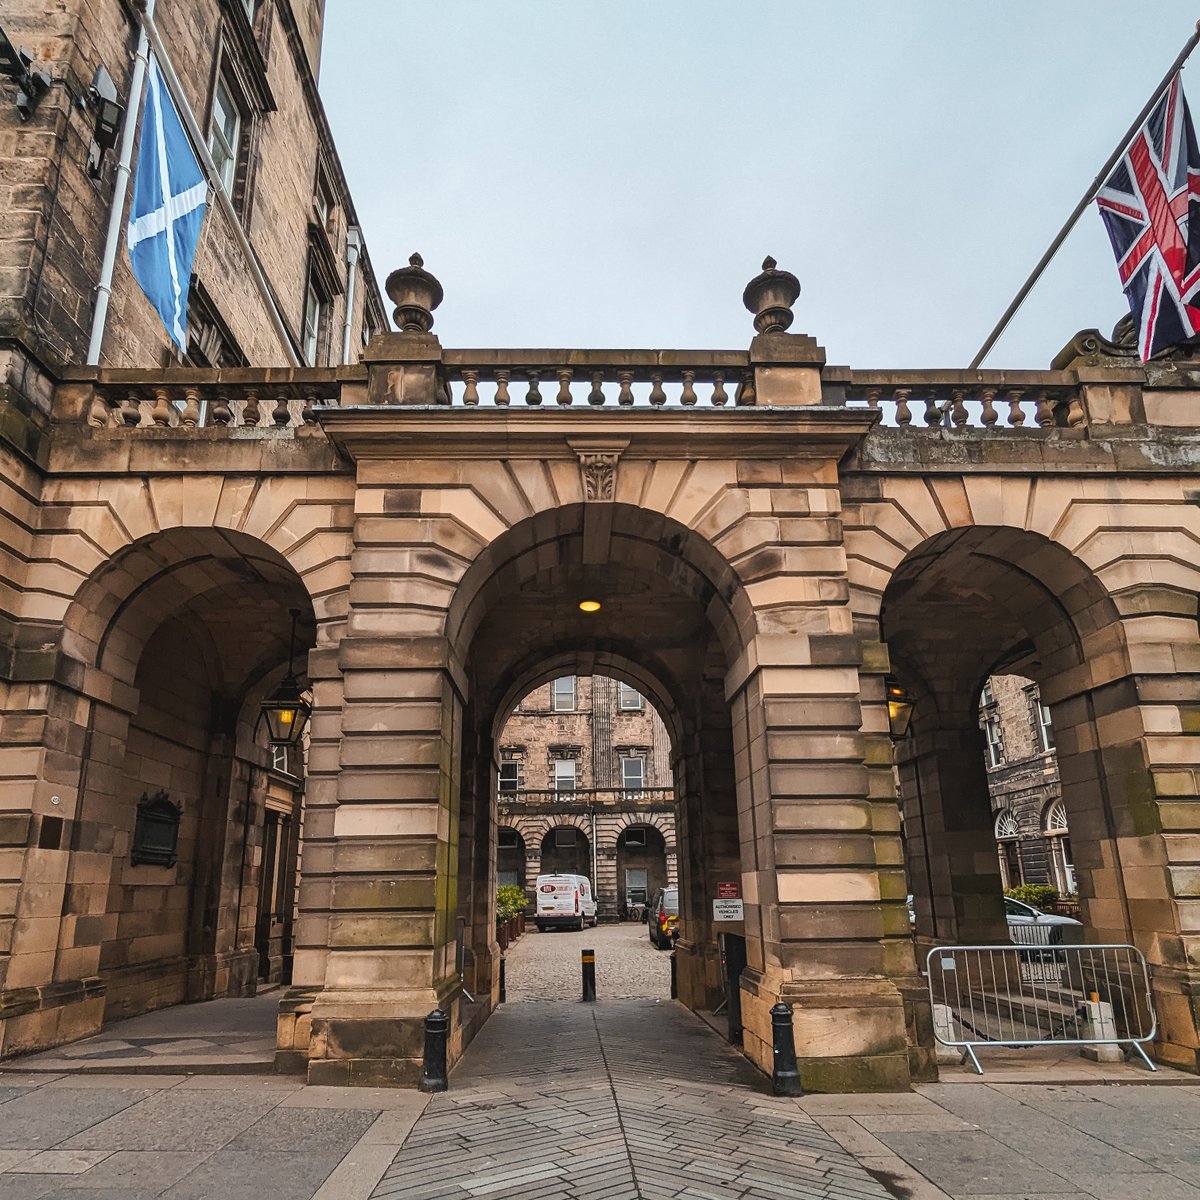 In 1753, the building of the Royal Exchange began. Prior to this building stood 4 closes - Mary King's Close, Stewart's Close, Pearson's Close and Allen’s Close. In 1811, it was acquired by the city council and rebranded as the City Chambers Building.